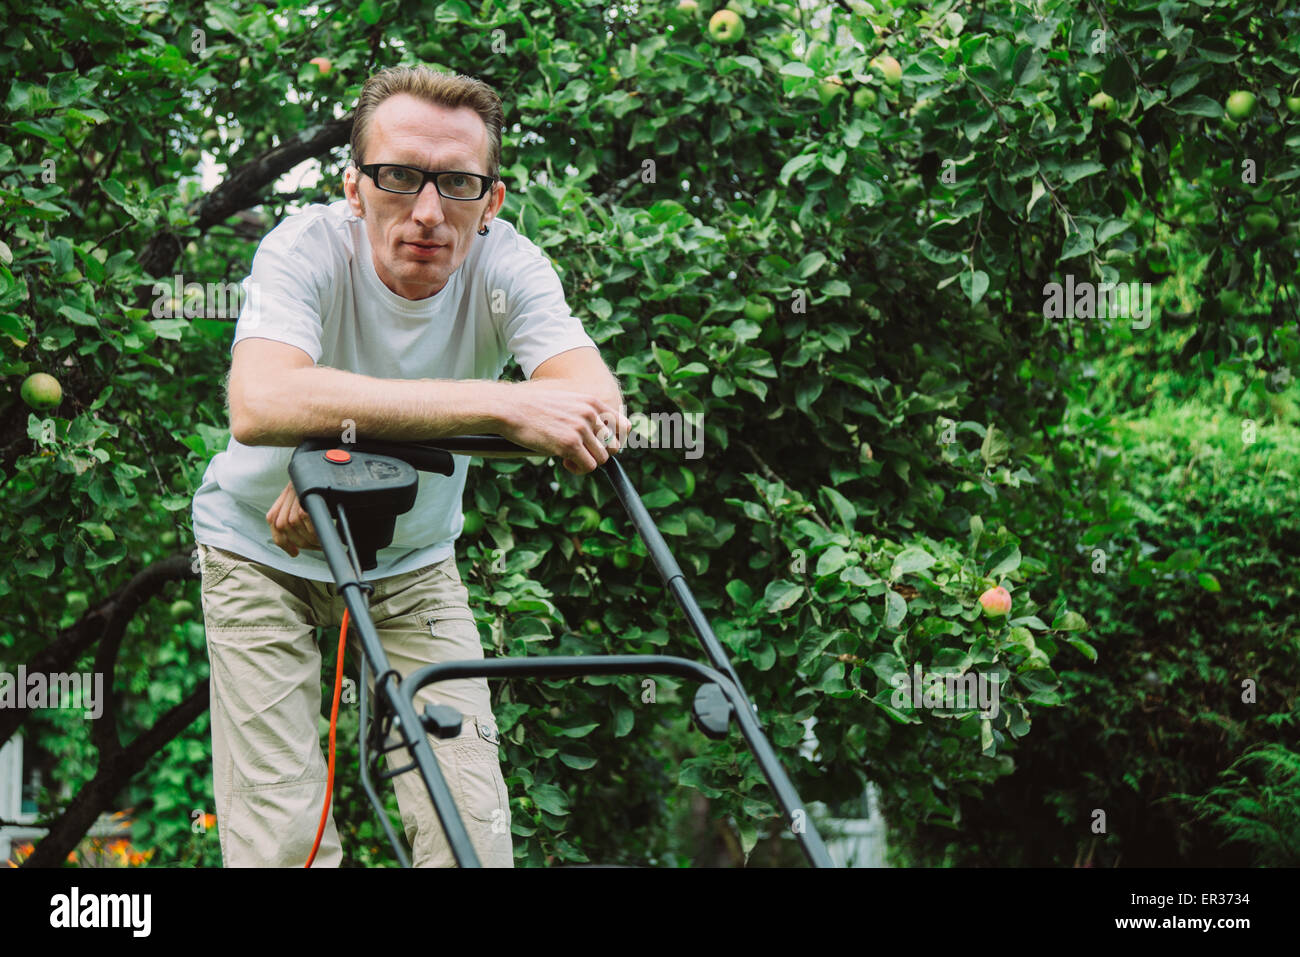 man with lawn mower Stock Photo